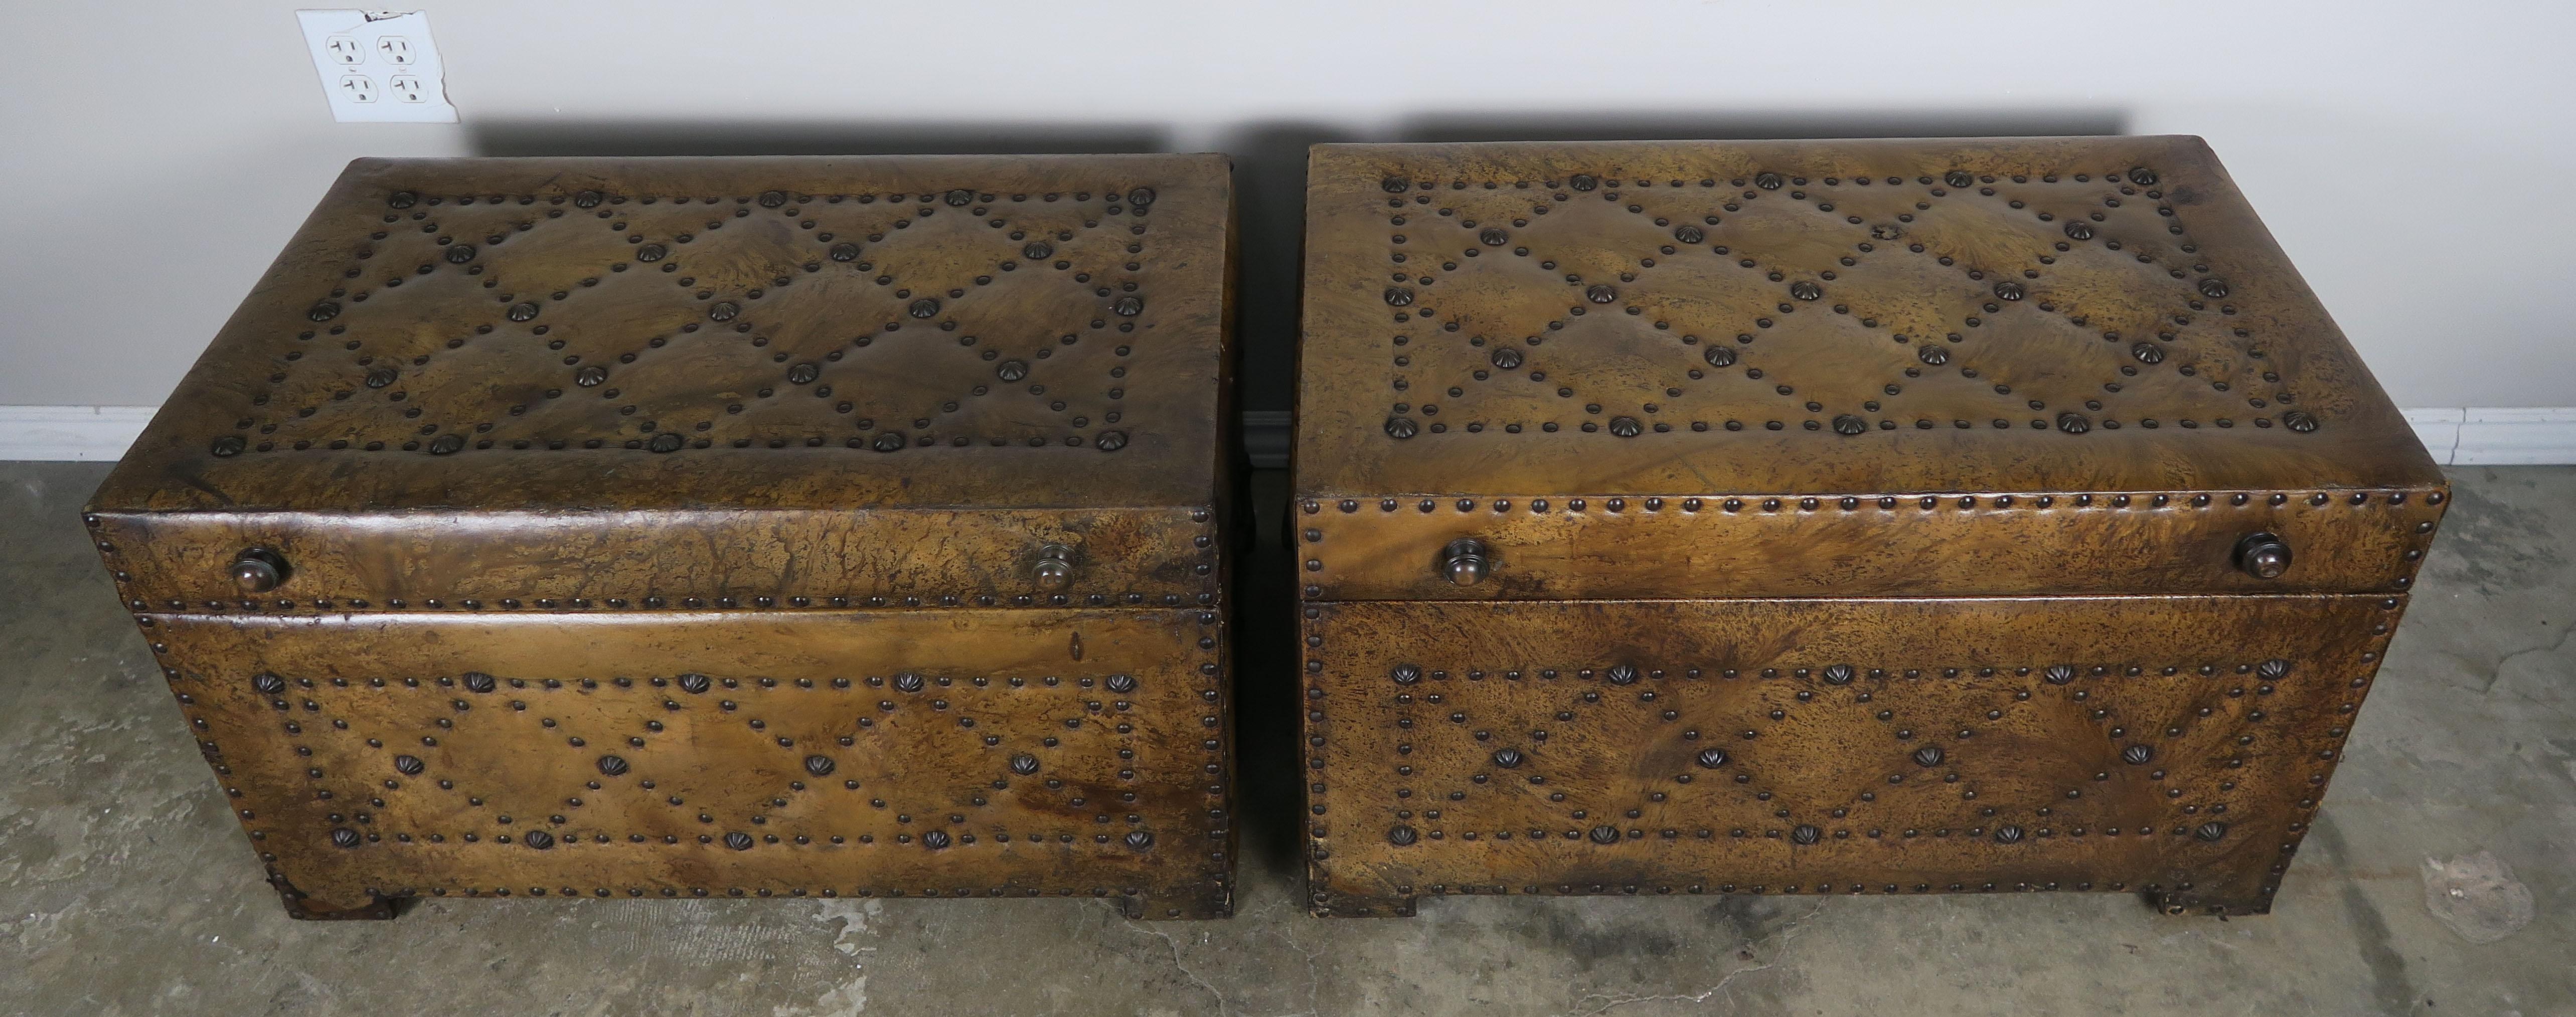 Baroque Pair of Spanish Leather Tufted Chests with Nailhead Trim